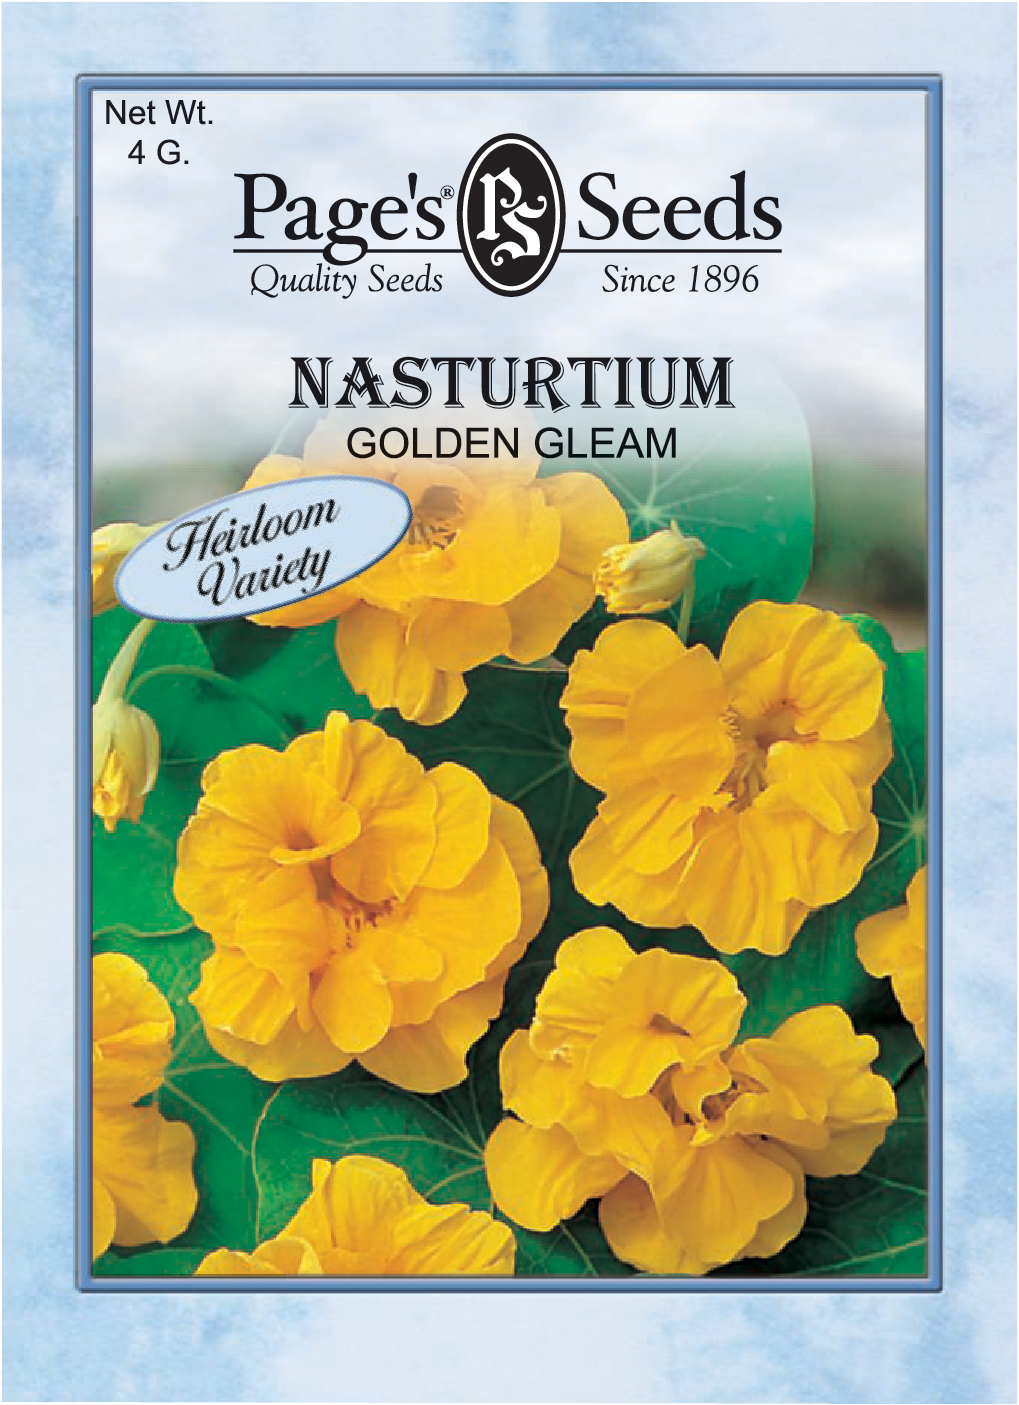 Nasturtium Golden Gleam The Page Seed Company Inc,Best Ceiling Fans Without Lights